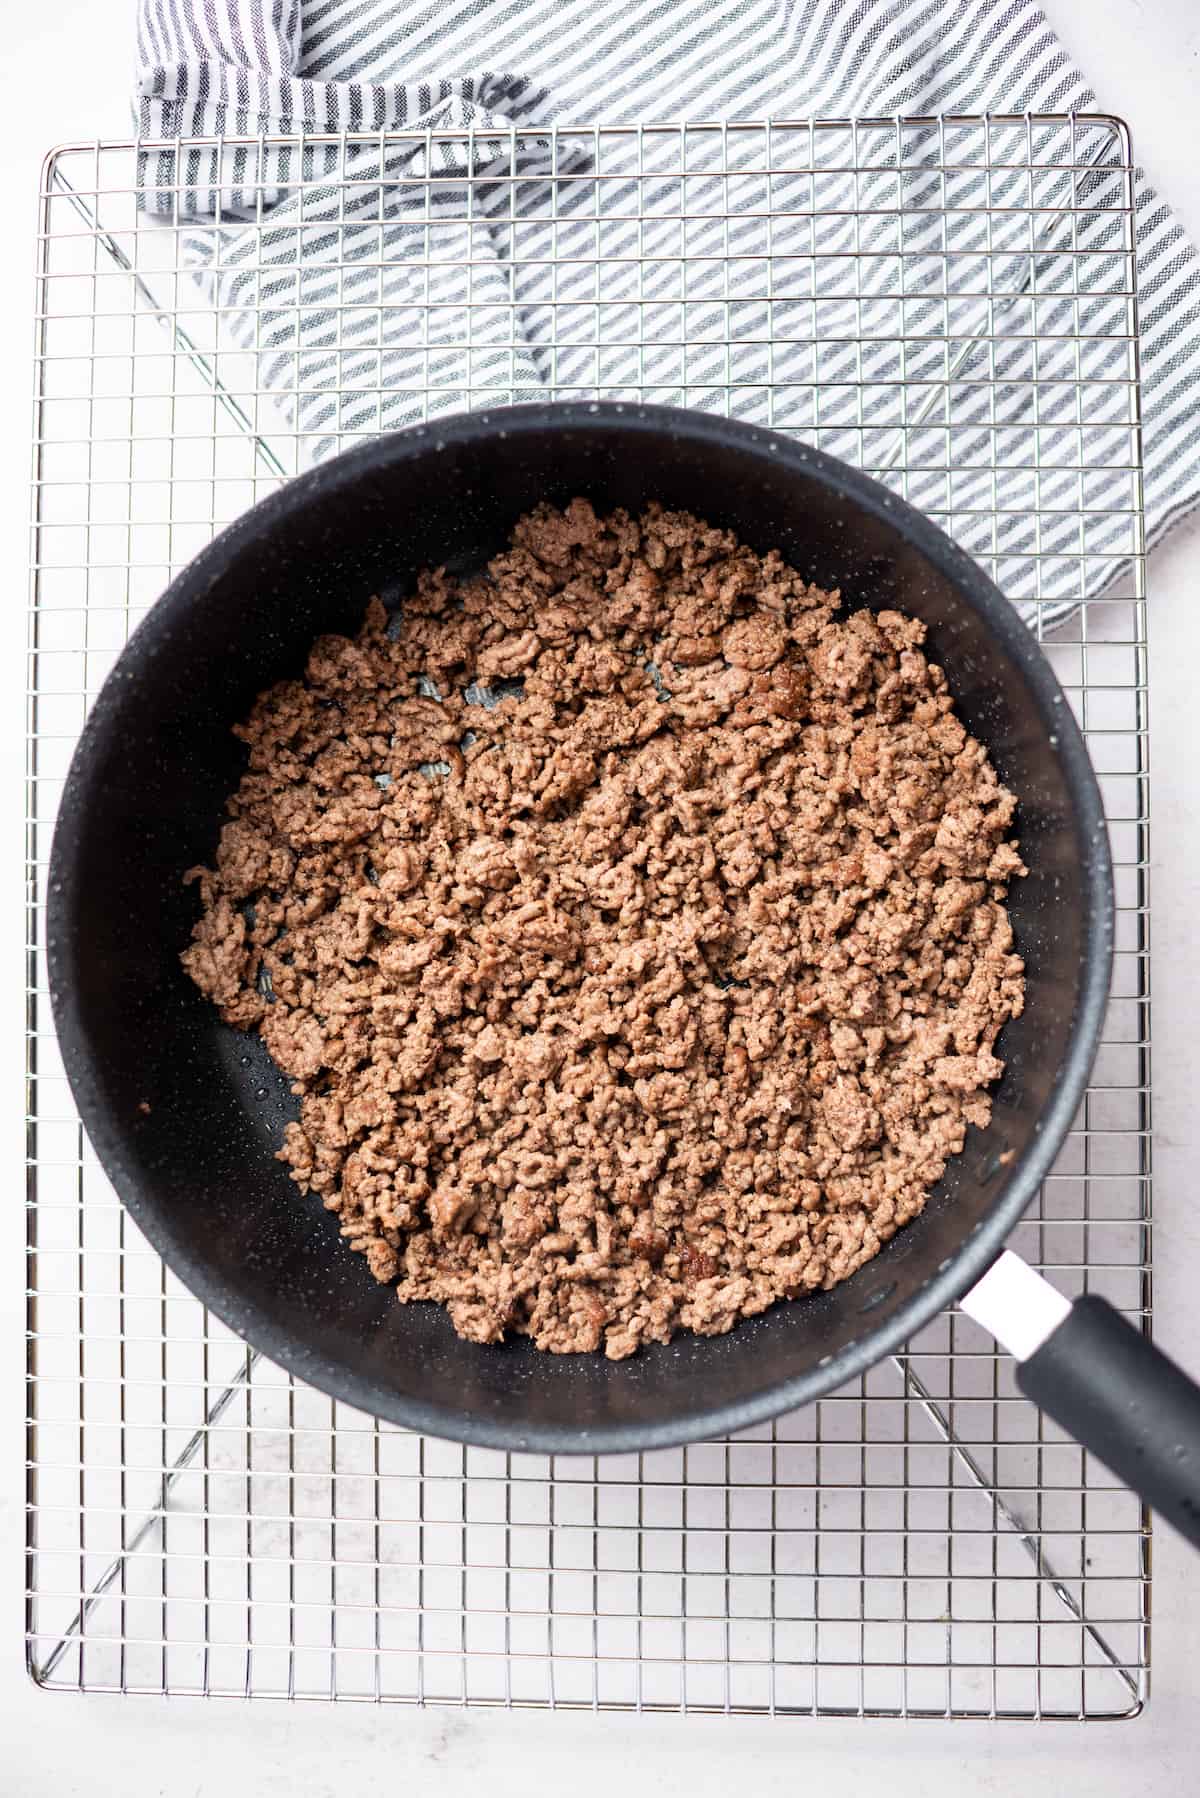 Ground beef in a black frying pan